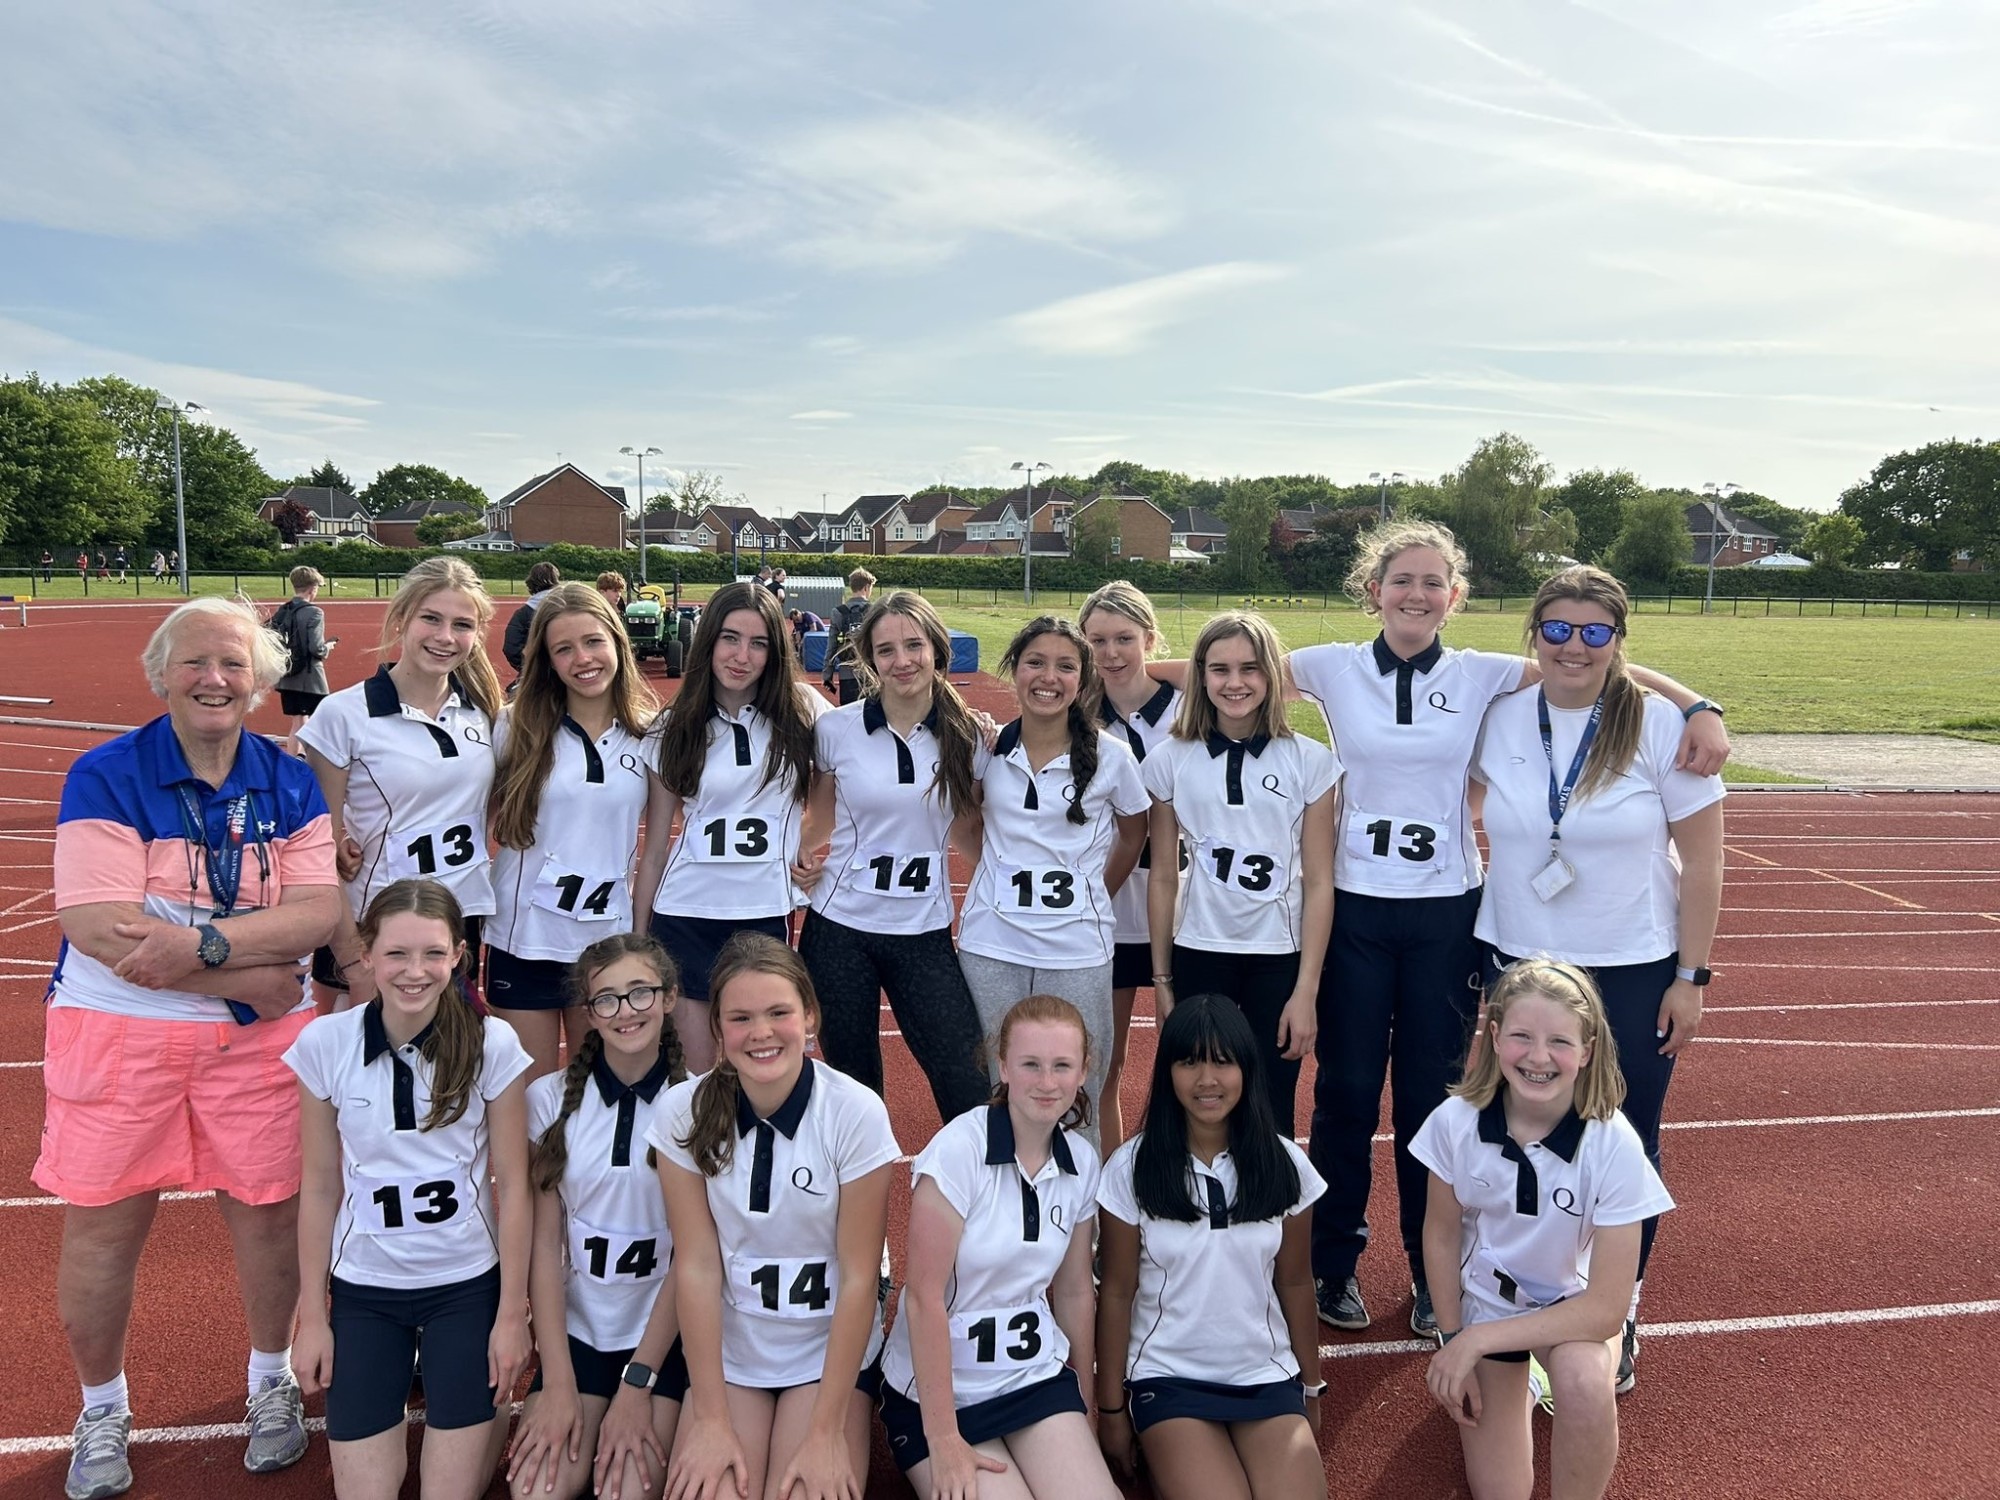 U13 and U15 Track and Field County Schools Cup